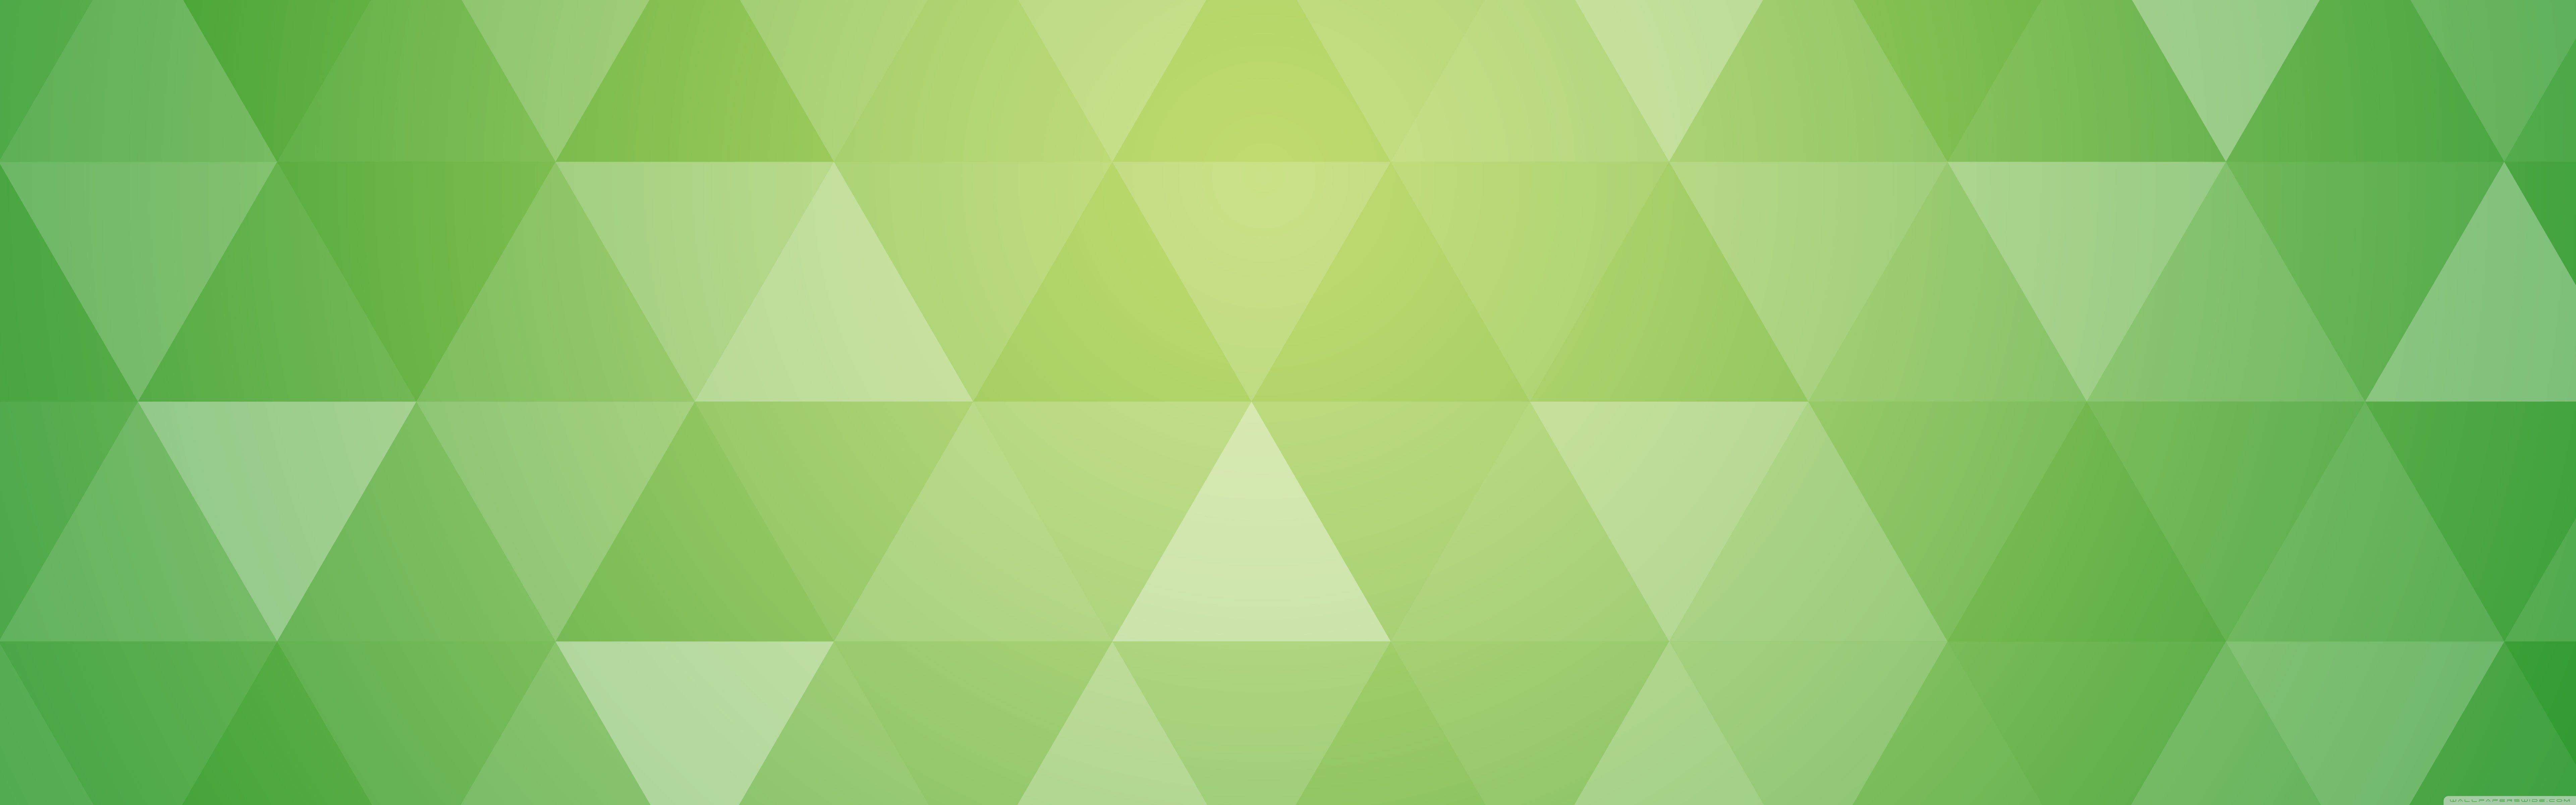 Green Abstract Geometric Triangle Background Wallpaper